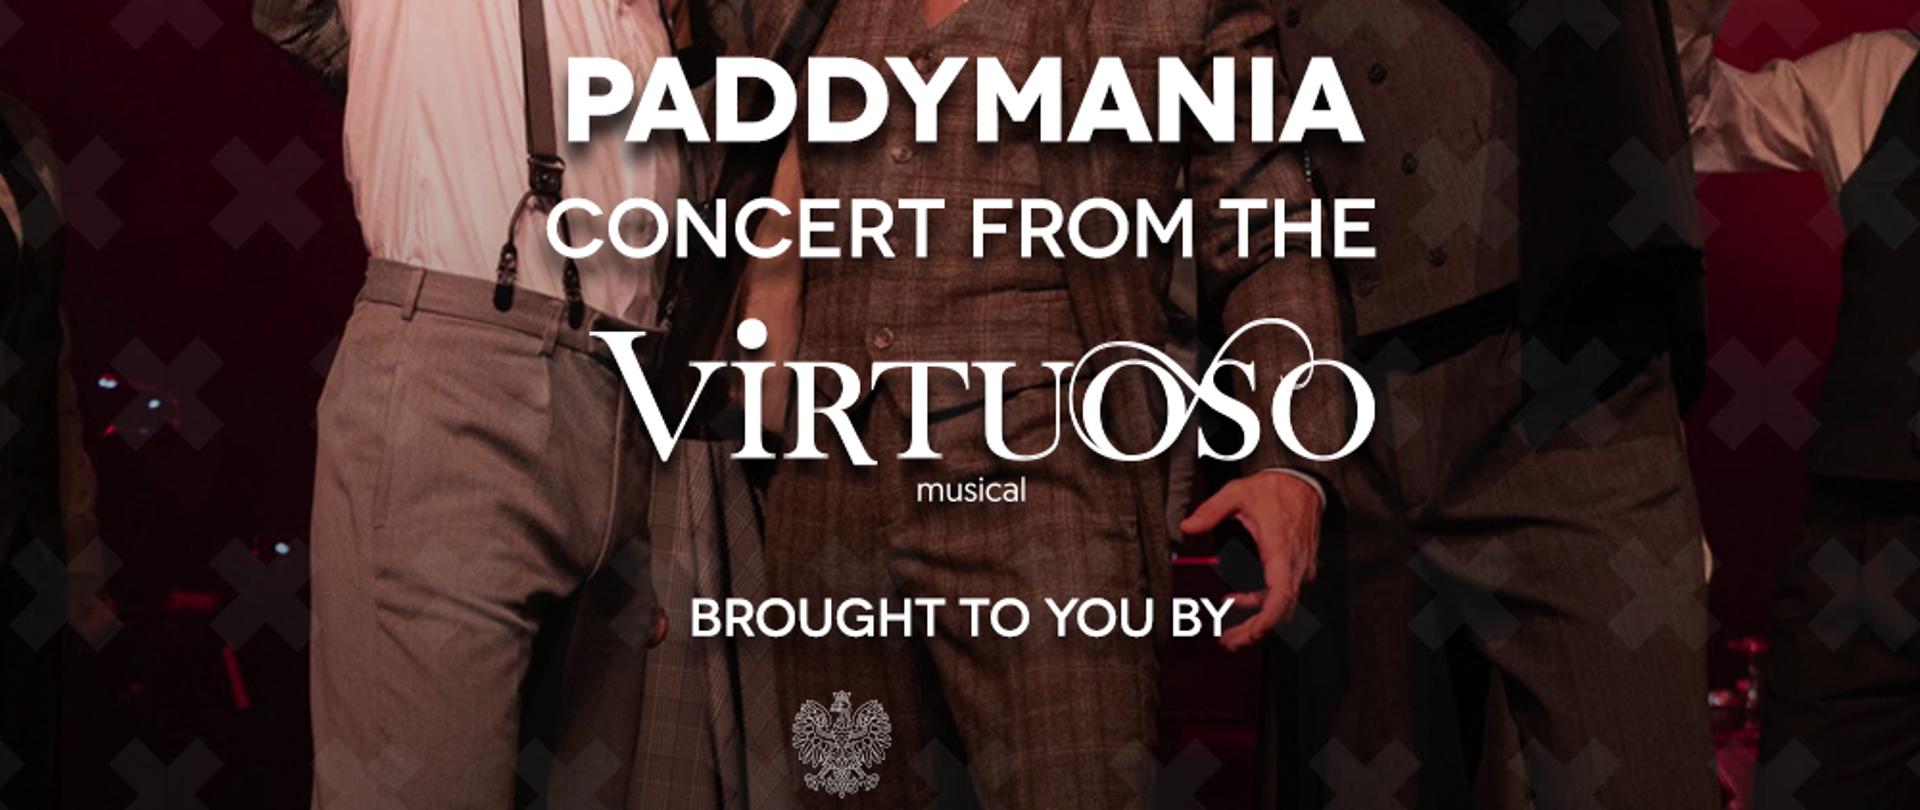 „PADDYMANIA” - a concert with songs from the musical VIRTUOSO - Musical Theater in Poznań